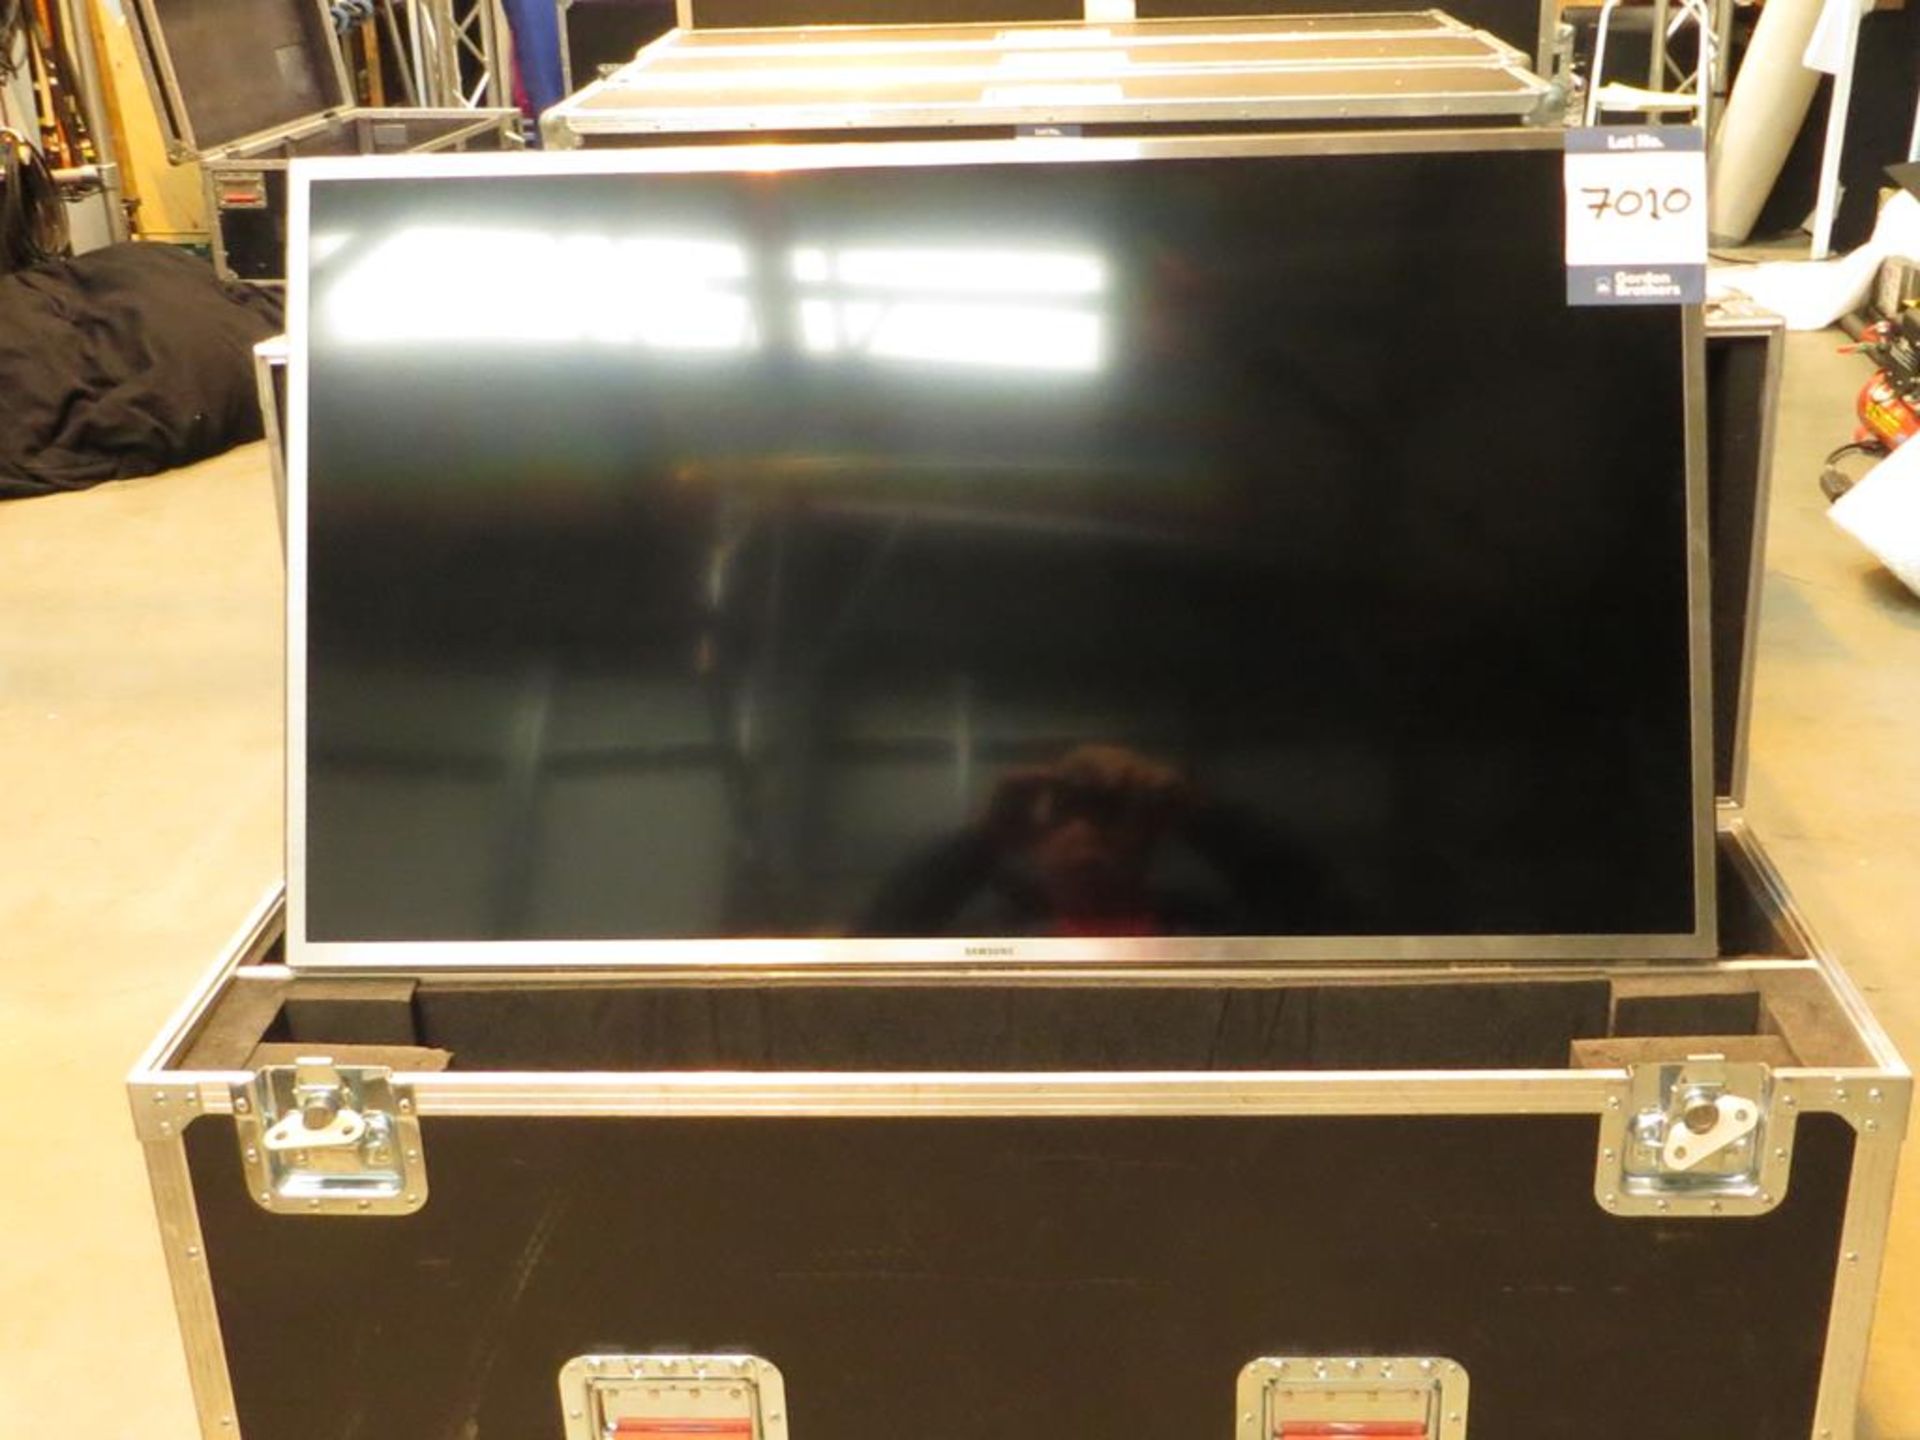 Samsung, 46" LED monitor, Model VE46F6200AM with Unicol, mount and remote control in transit case: - Image 2 of 3